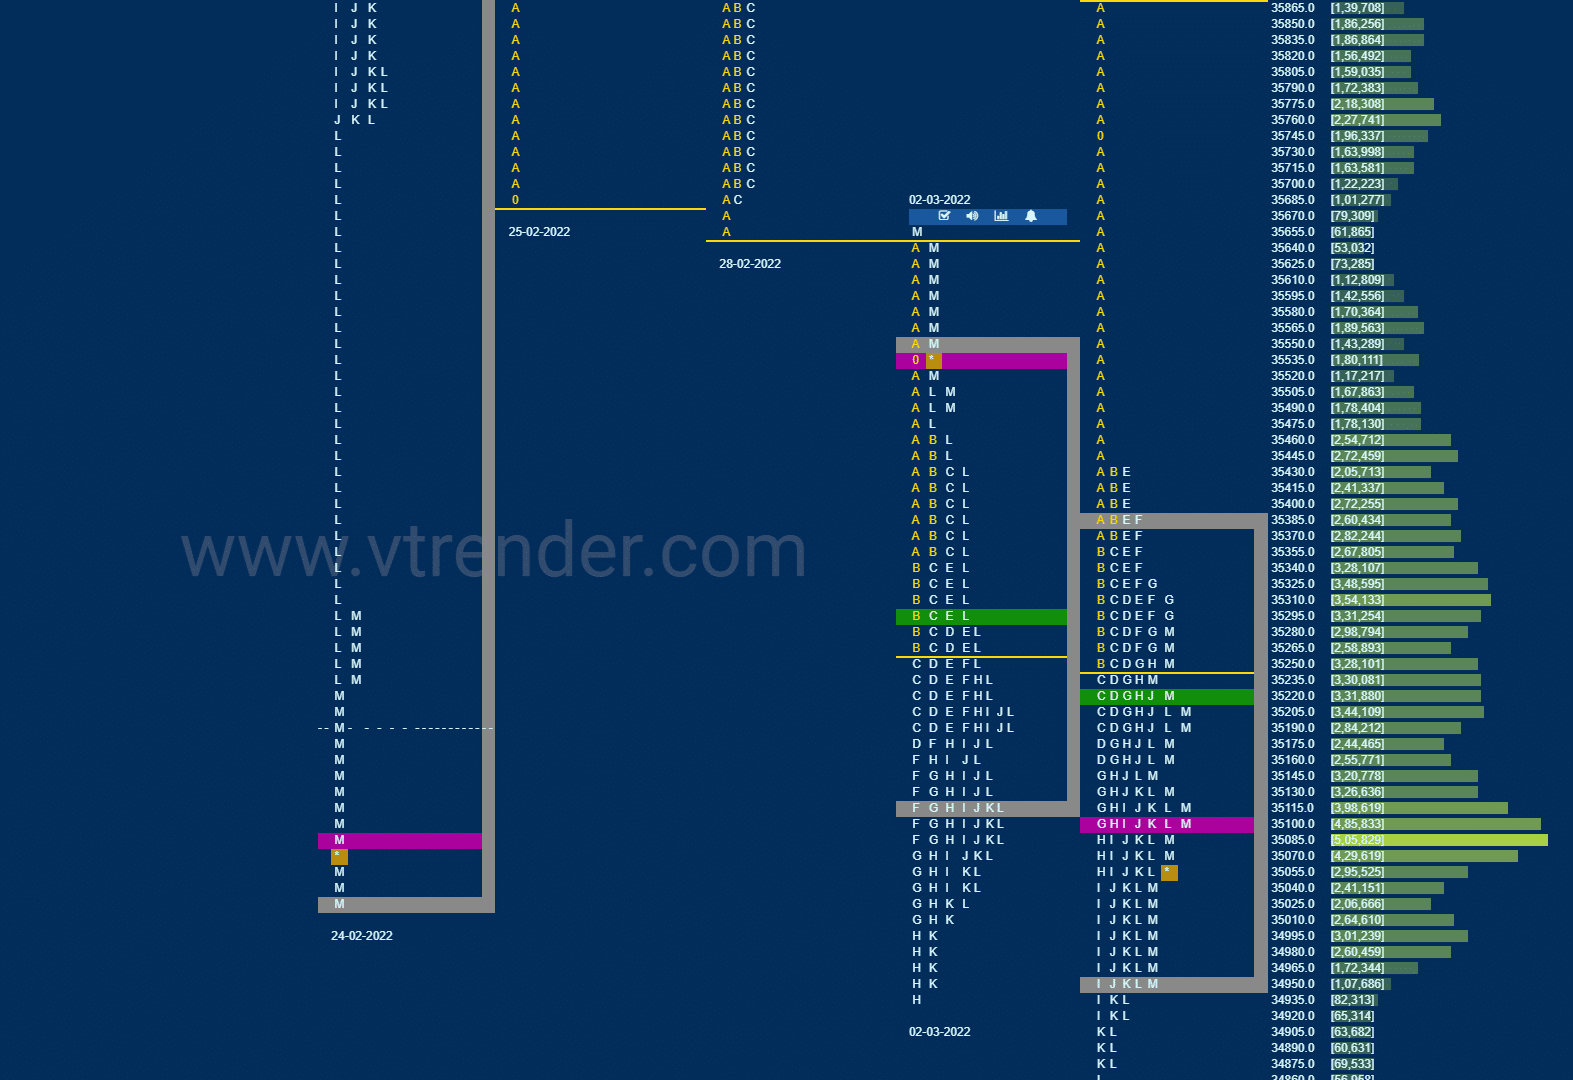 Bnf 2 Market Profile Analysis Dated 03Rd March 2022 Banknifty Futures, Charts, Day Trading, Intraday Trading, Intraday Trading Strategies, Market Profile, Market Profile Trading Strategies, Nifty Futures, Order Flow Analysis, Support And Resistance, Technical Analysis, Trading Strategies, Volume Profile Trading